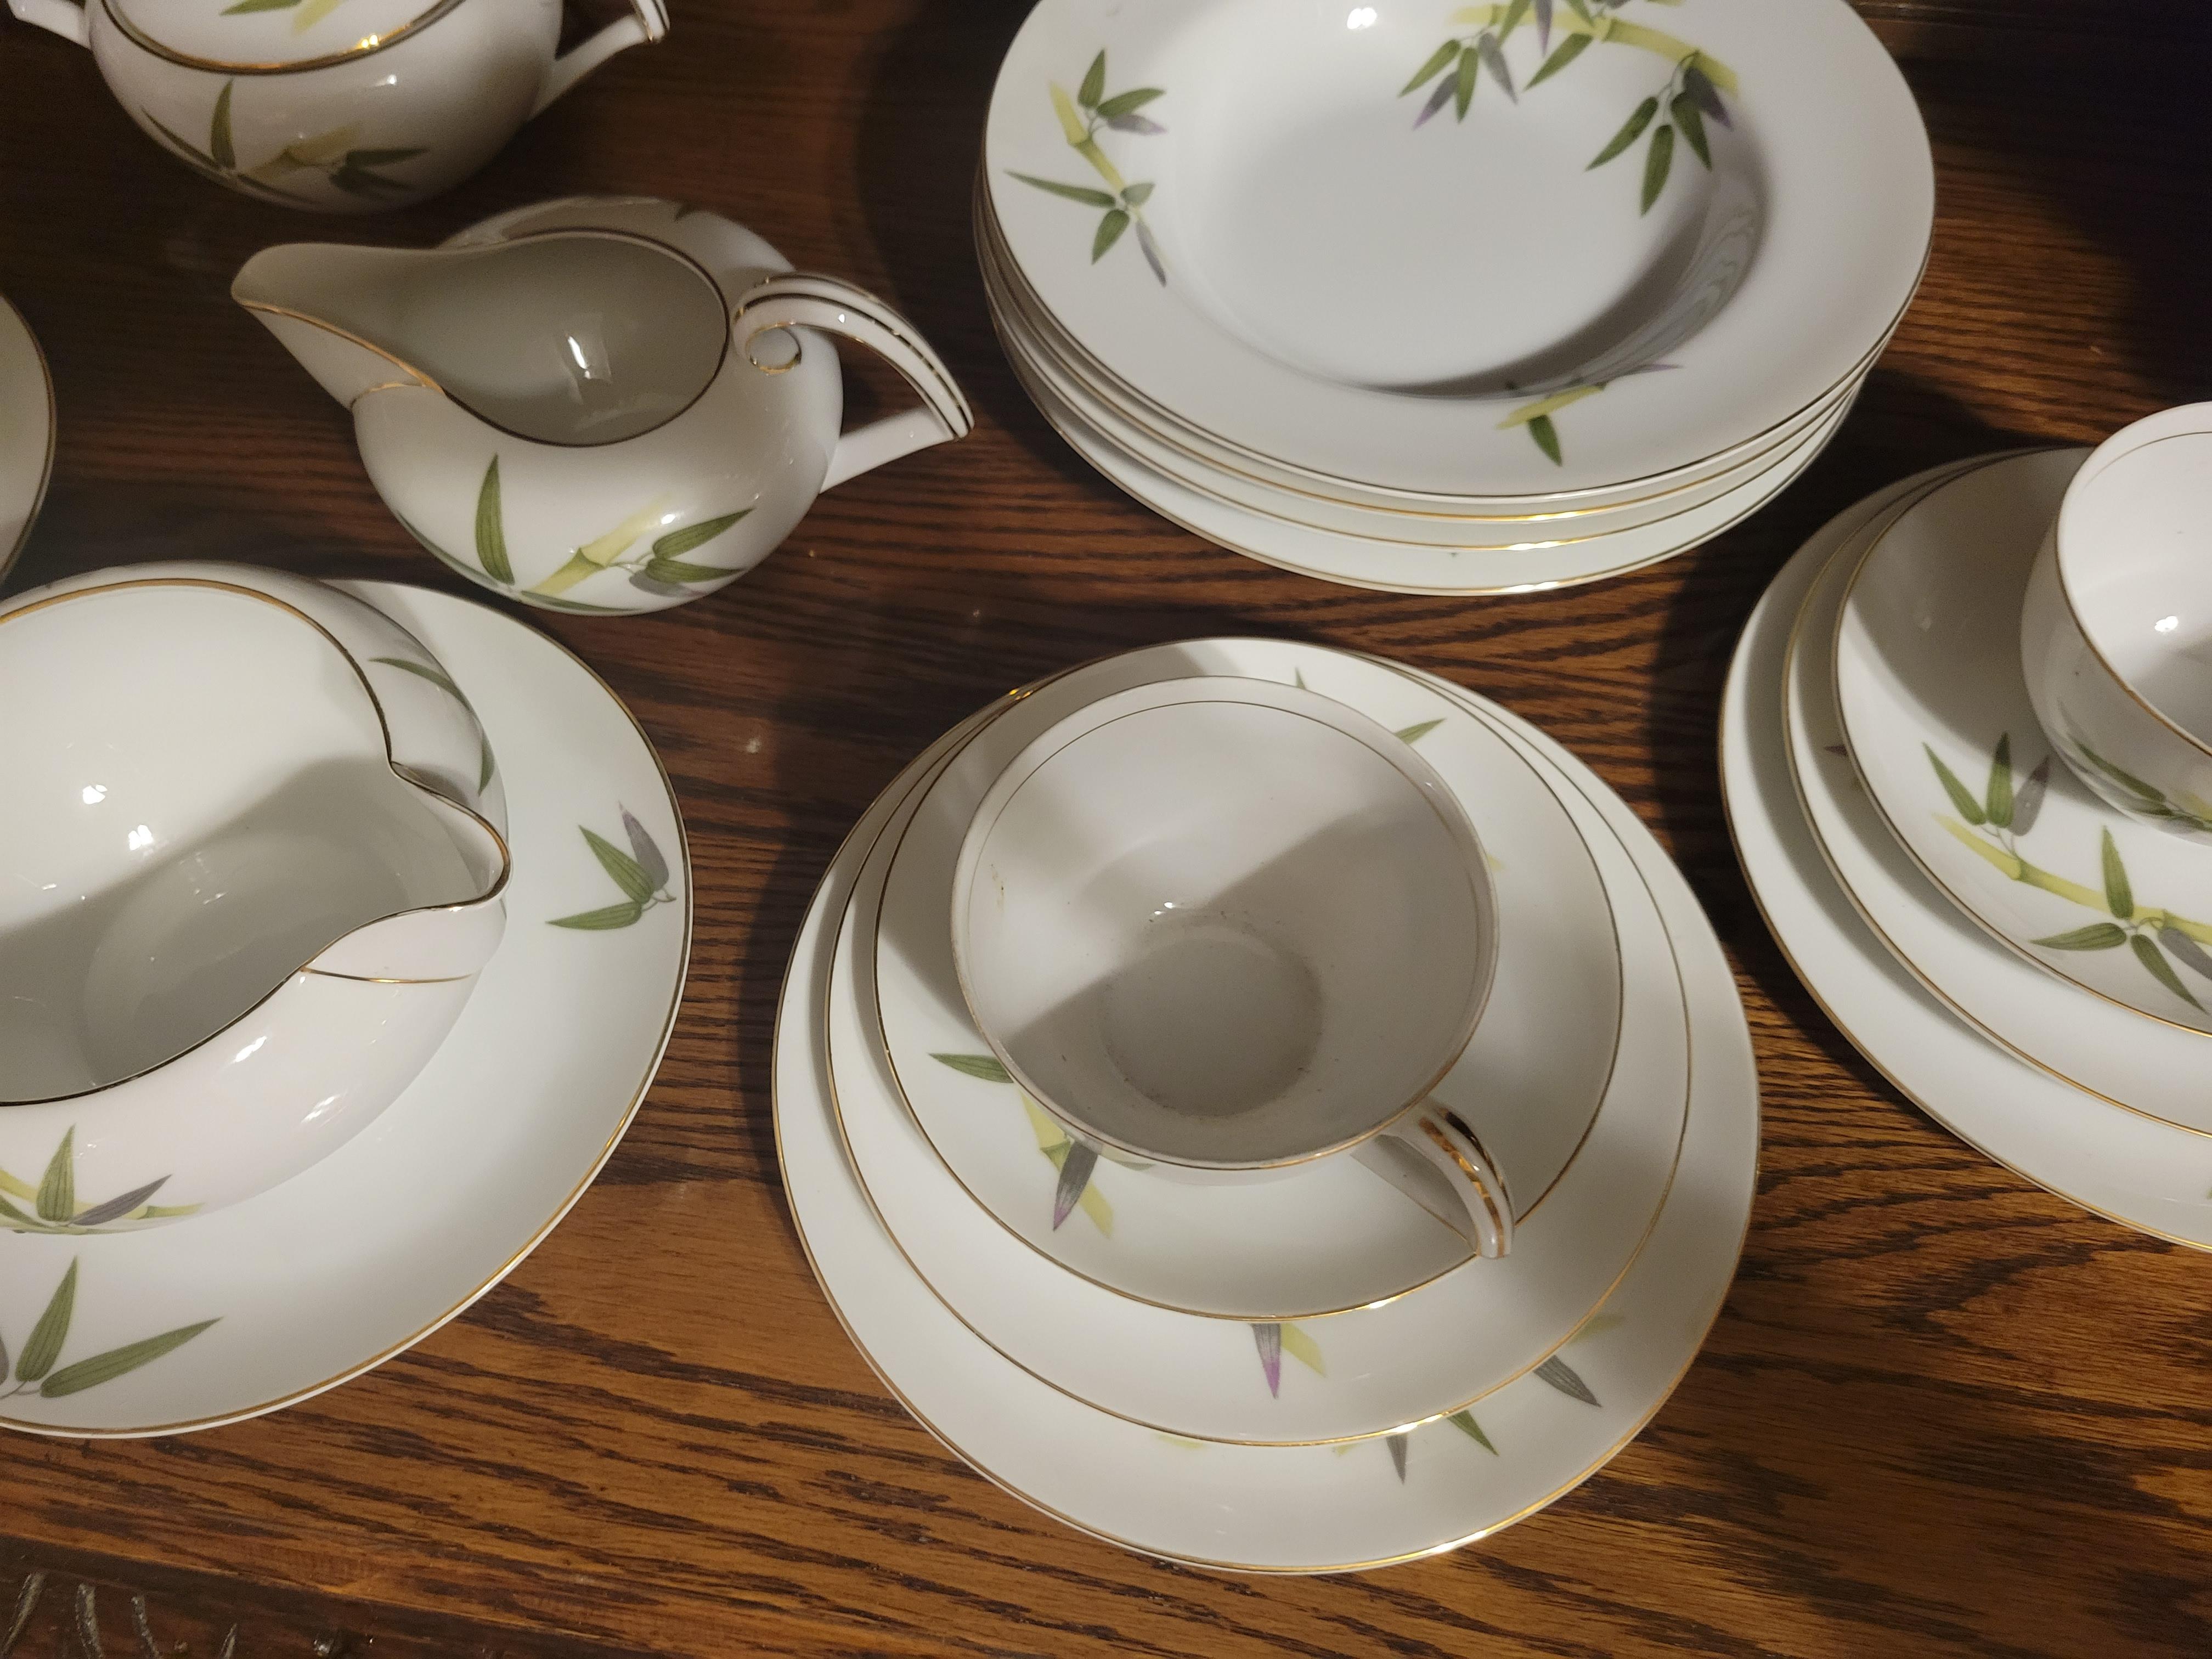 1951 Narumi Japan 'Spring Bamboo' Fine China Set - 24 pieces plus replacements  In Good Condition For Sale In Phoenix, AZ